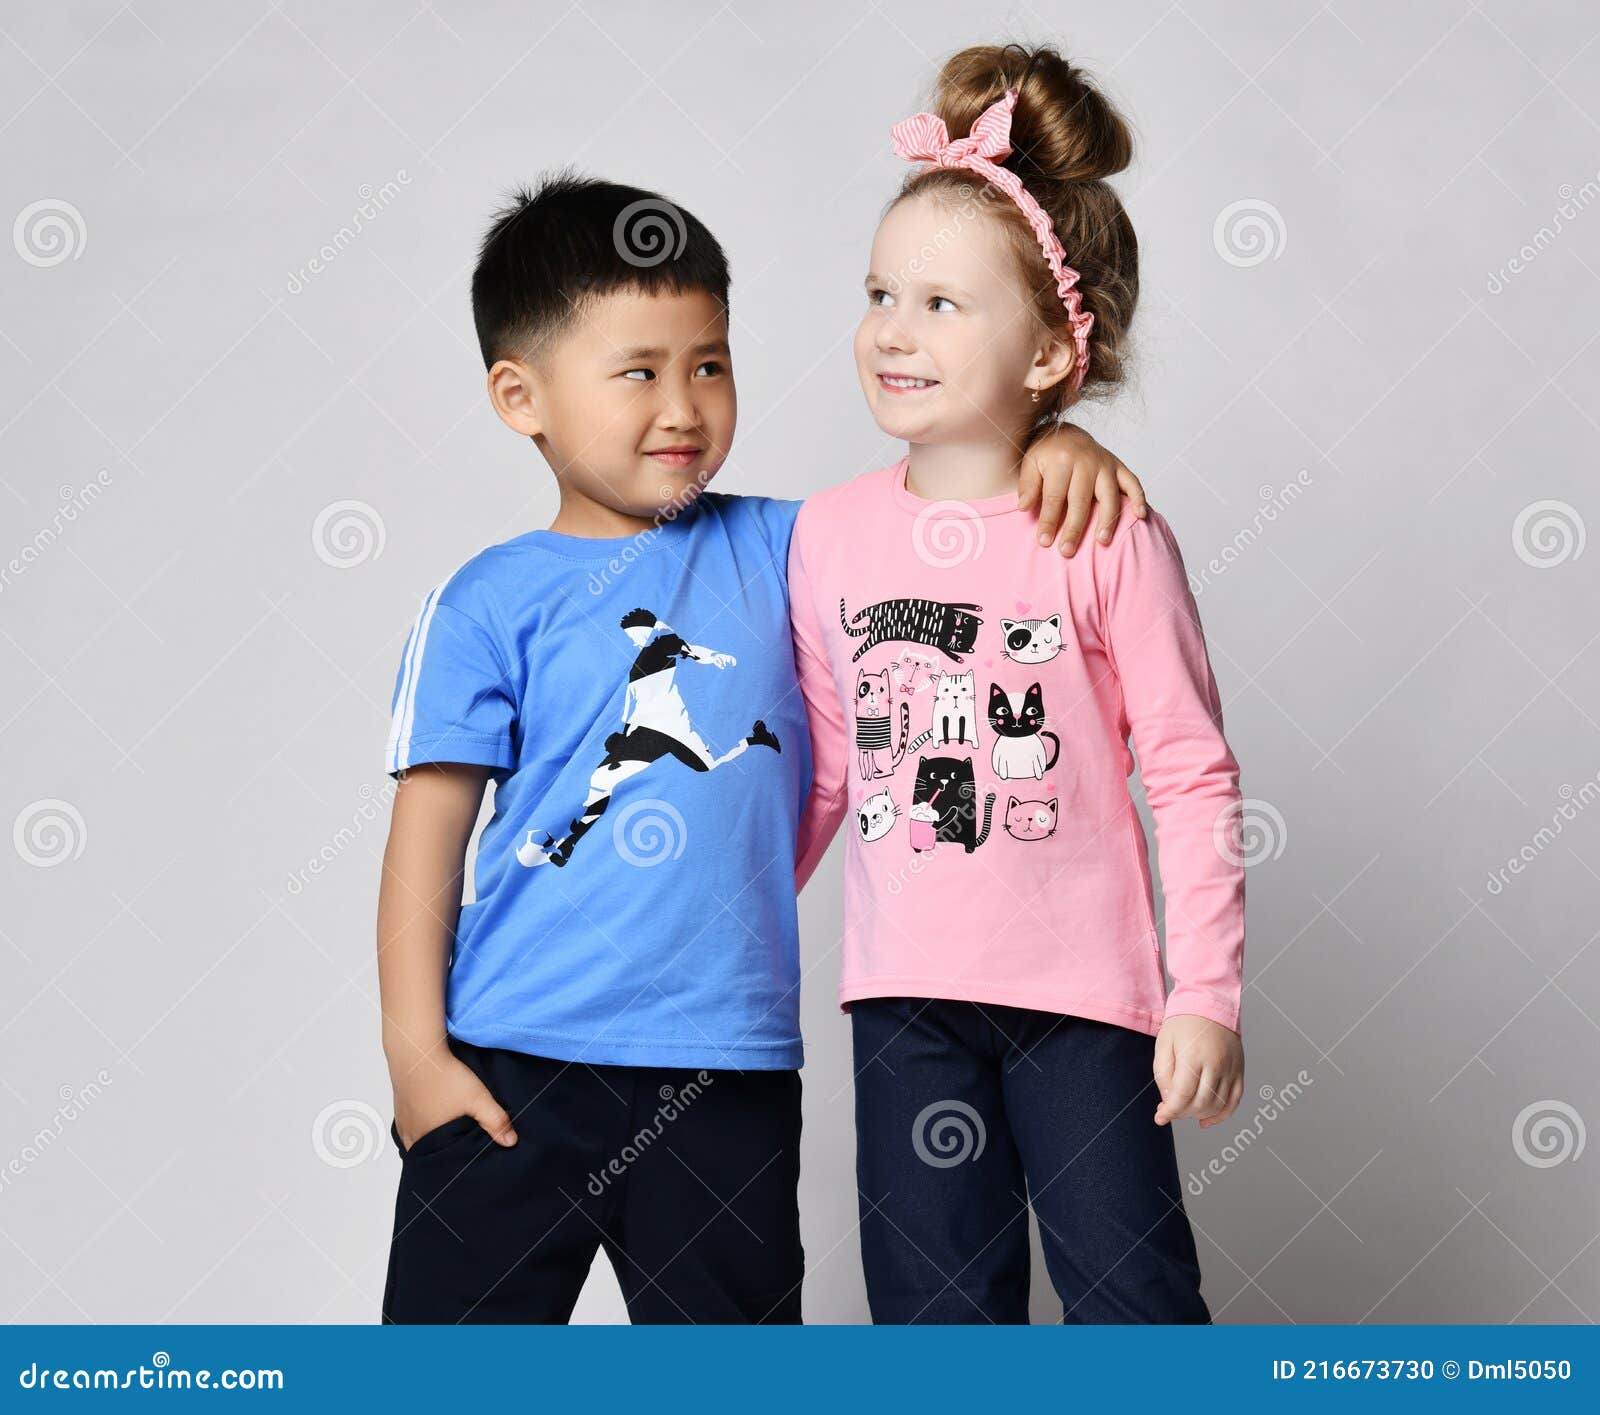 943 Little Boy Girl Best Friends Photos Free Royalty Free Stock Photos From Dreamstime